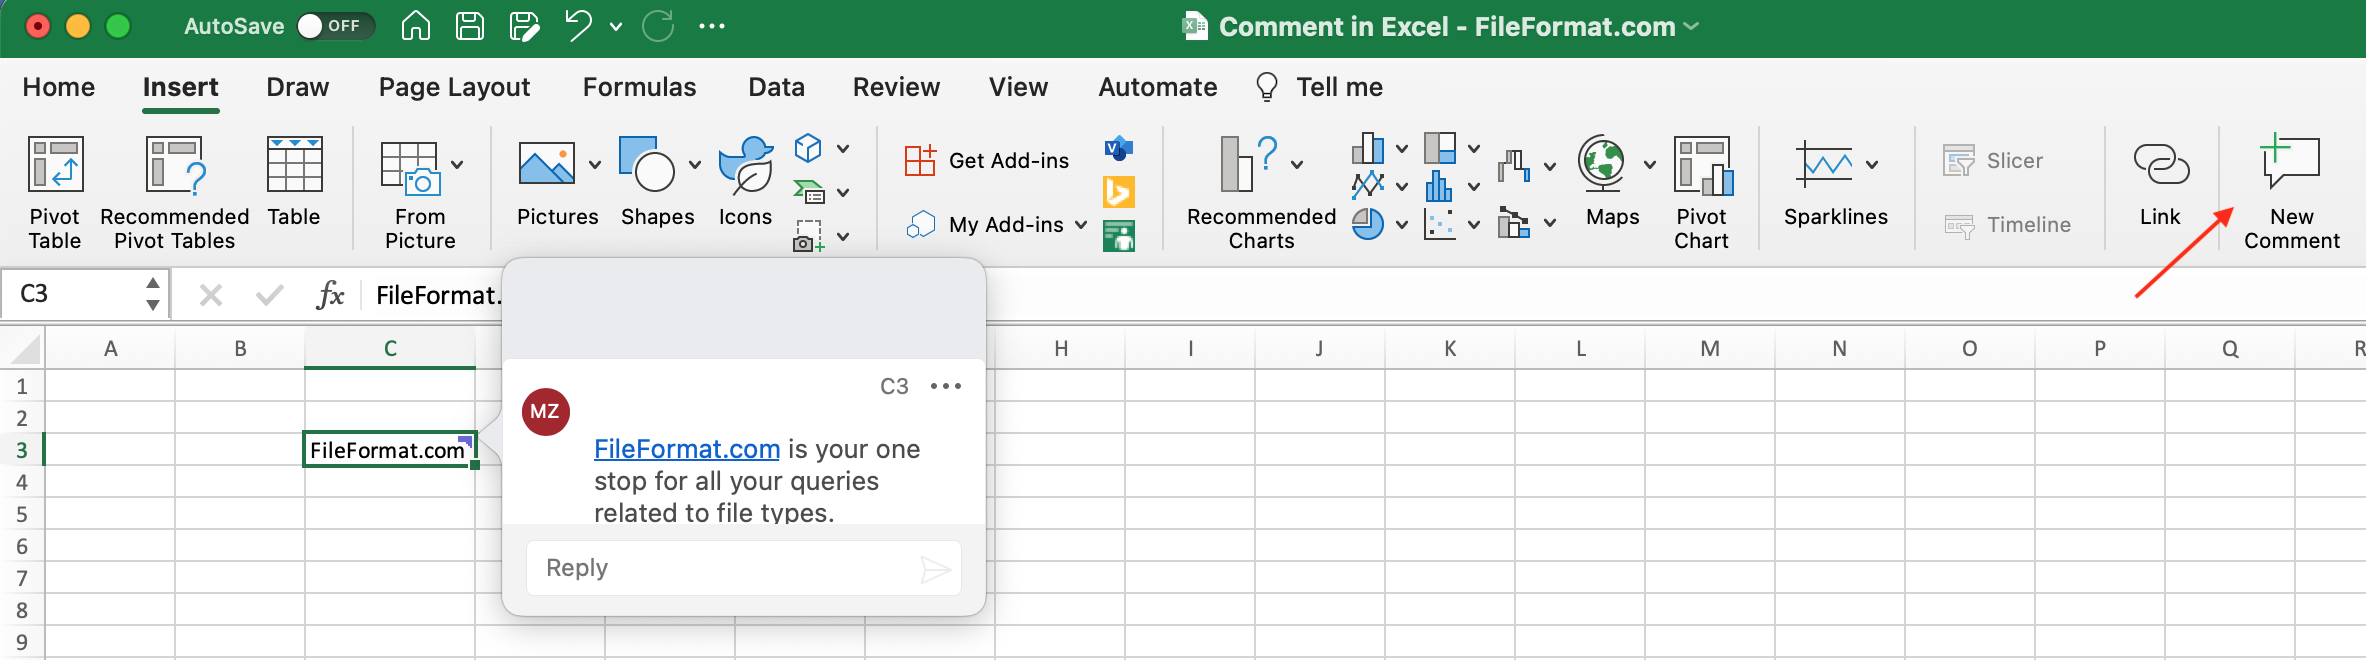 Comment-in-Excel-Workbook